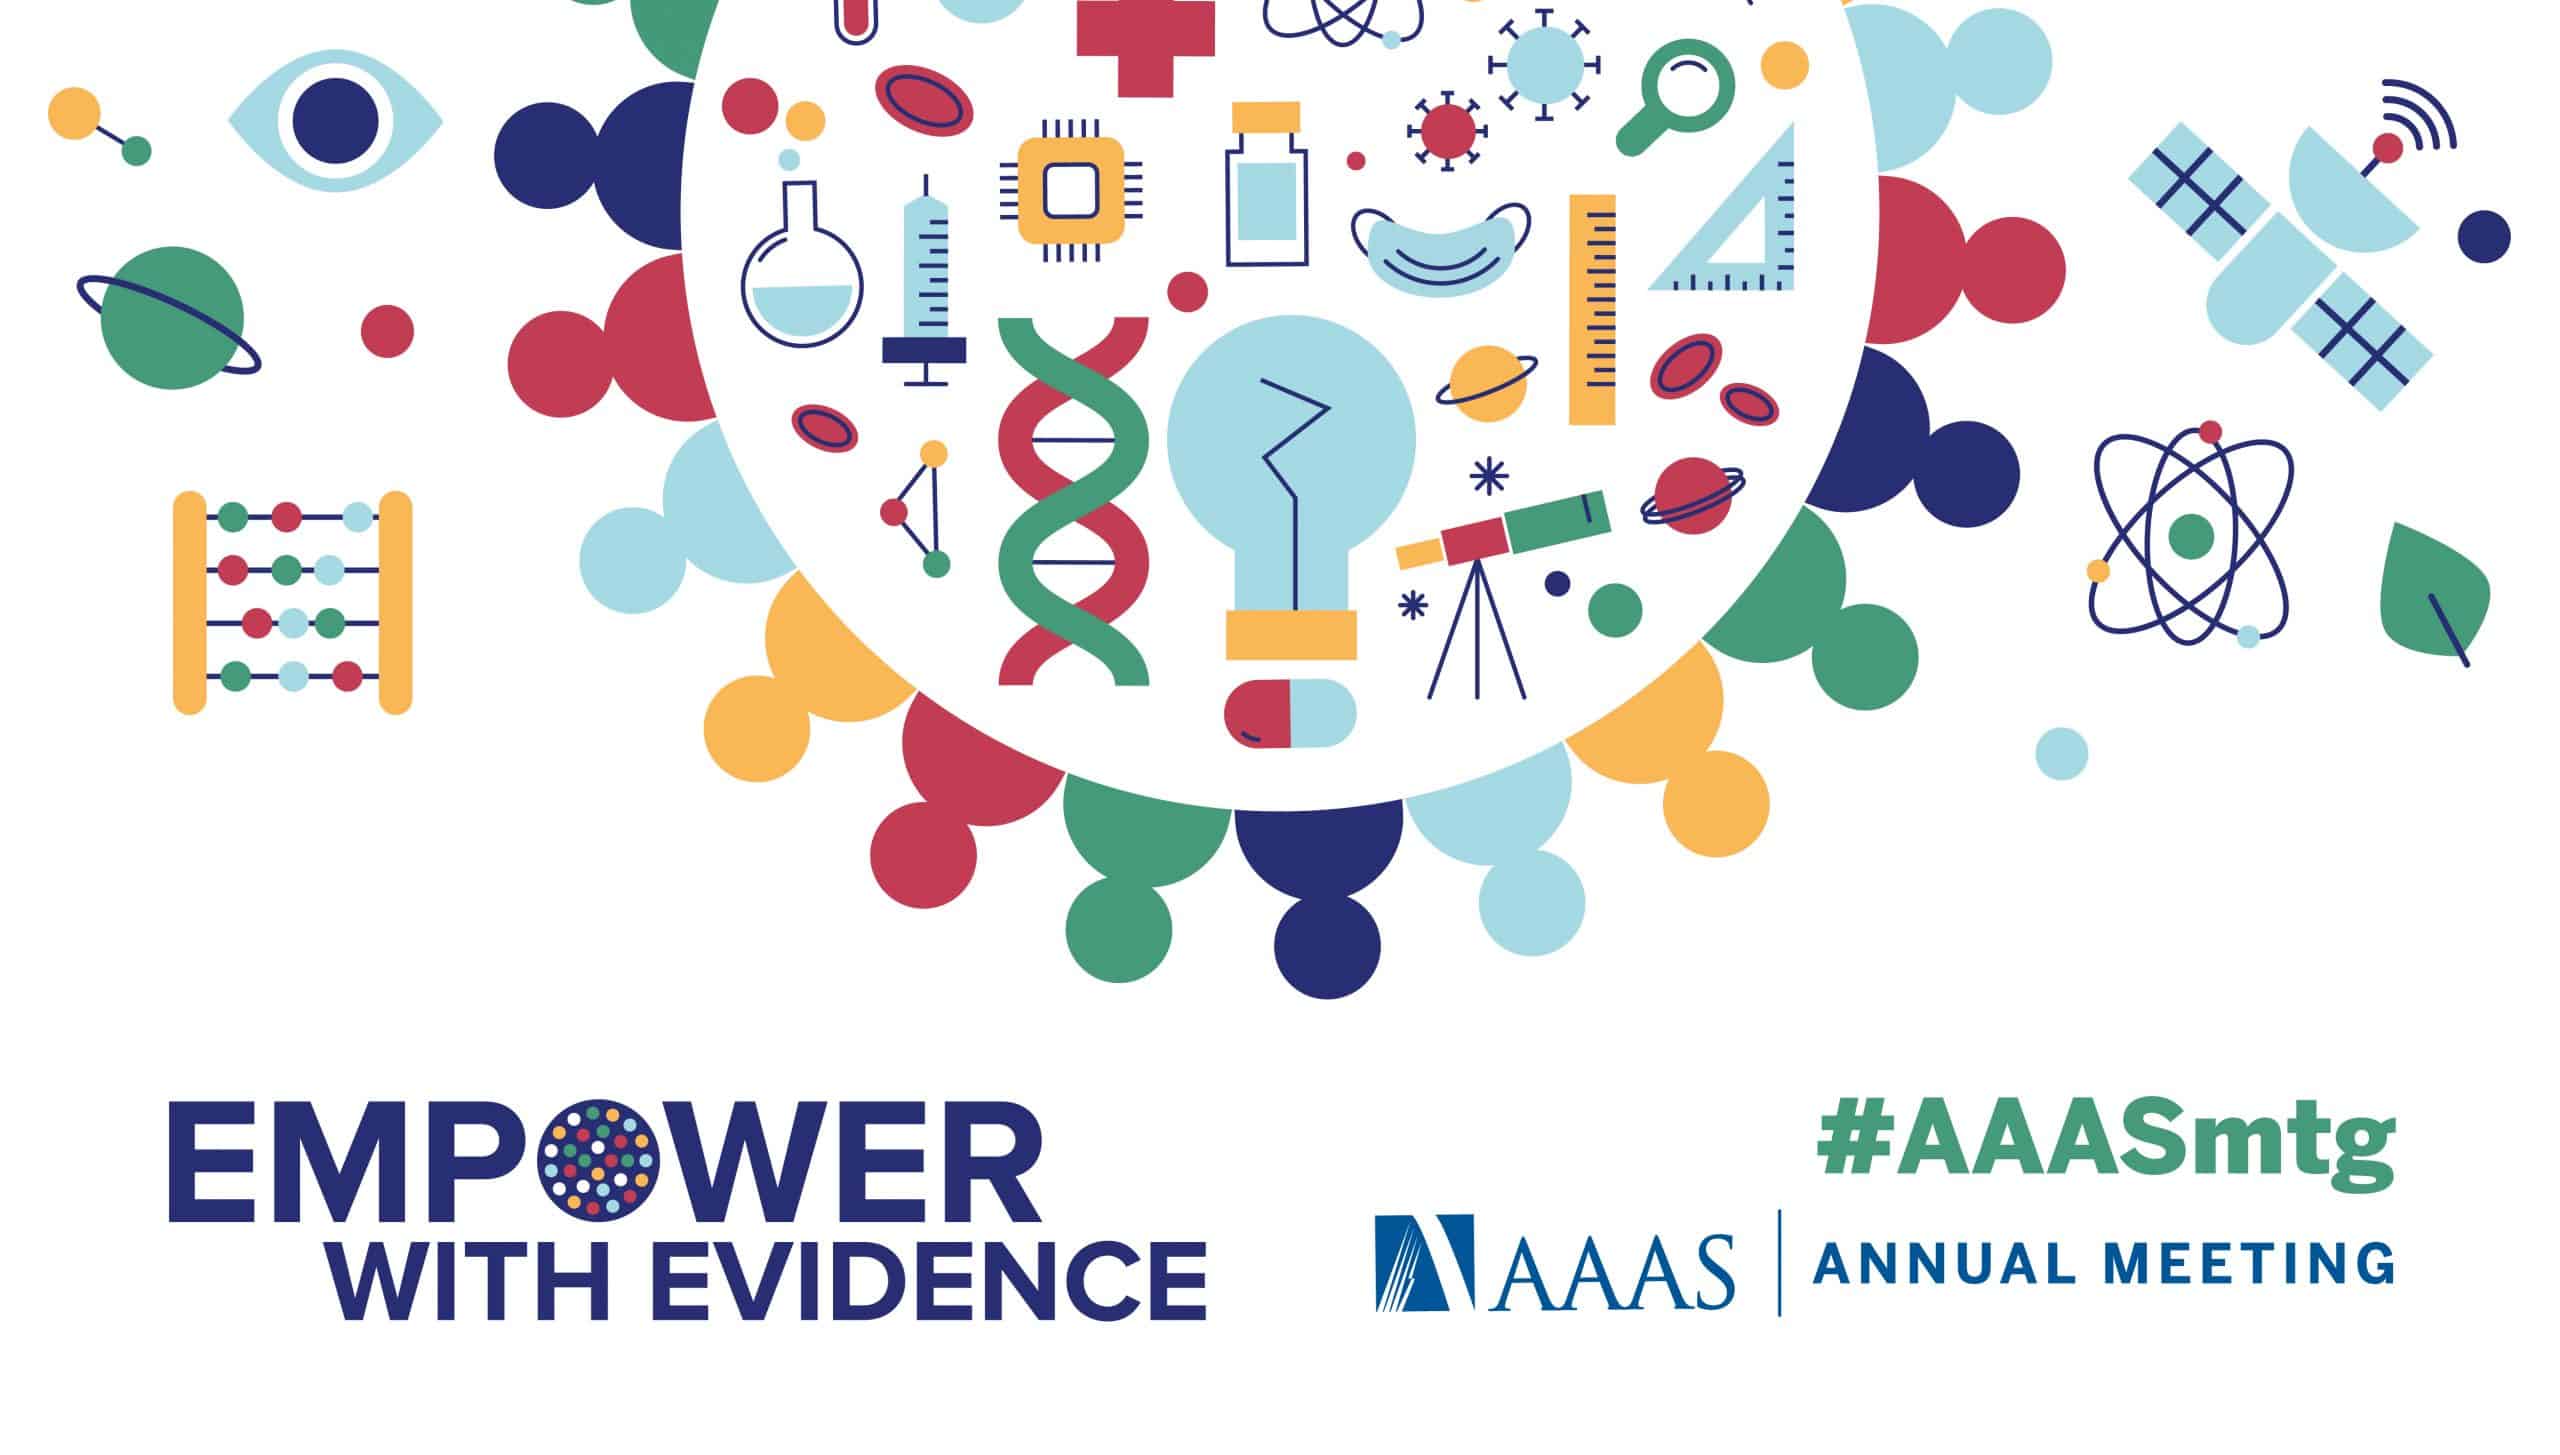 AAAS graphic with headline Empower with Evidence hashtag A A A S m t g. Text says Be a part of the conversation. Word bubbles include: Public Health, Science Communication, Big Data, Diversity and Equity, and more. Illustration shows various scientific motifs encircled by the outline of a cell wall or virus casing with protein spikes.